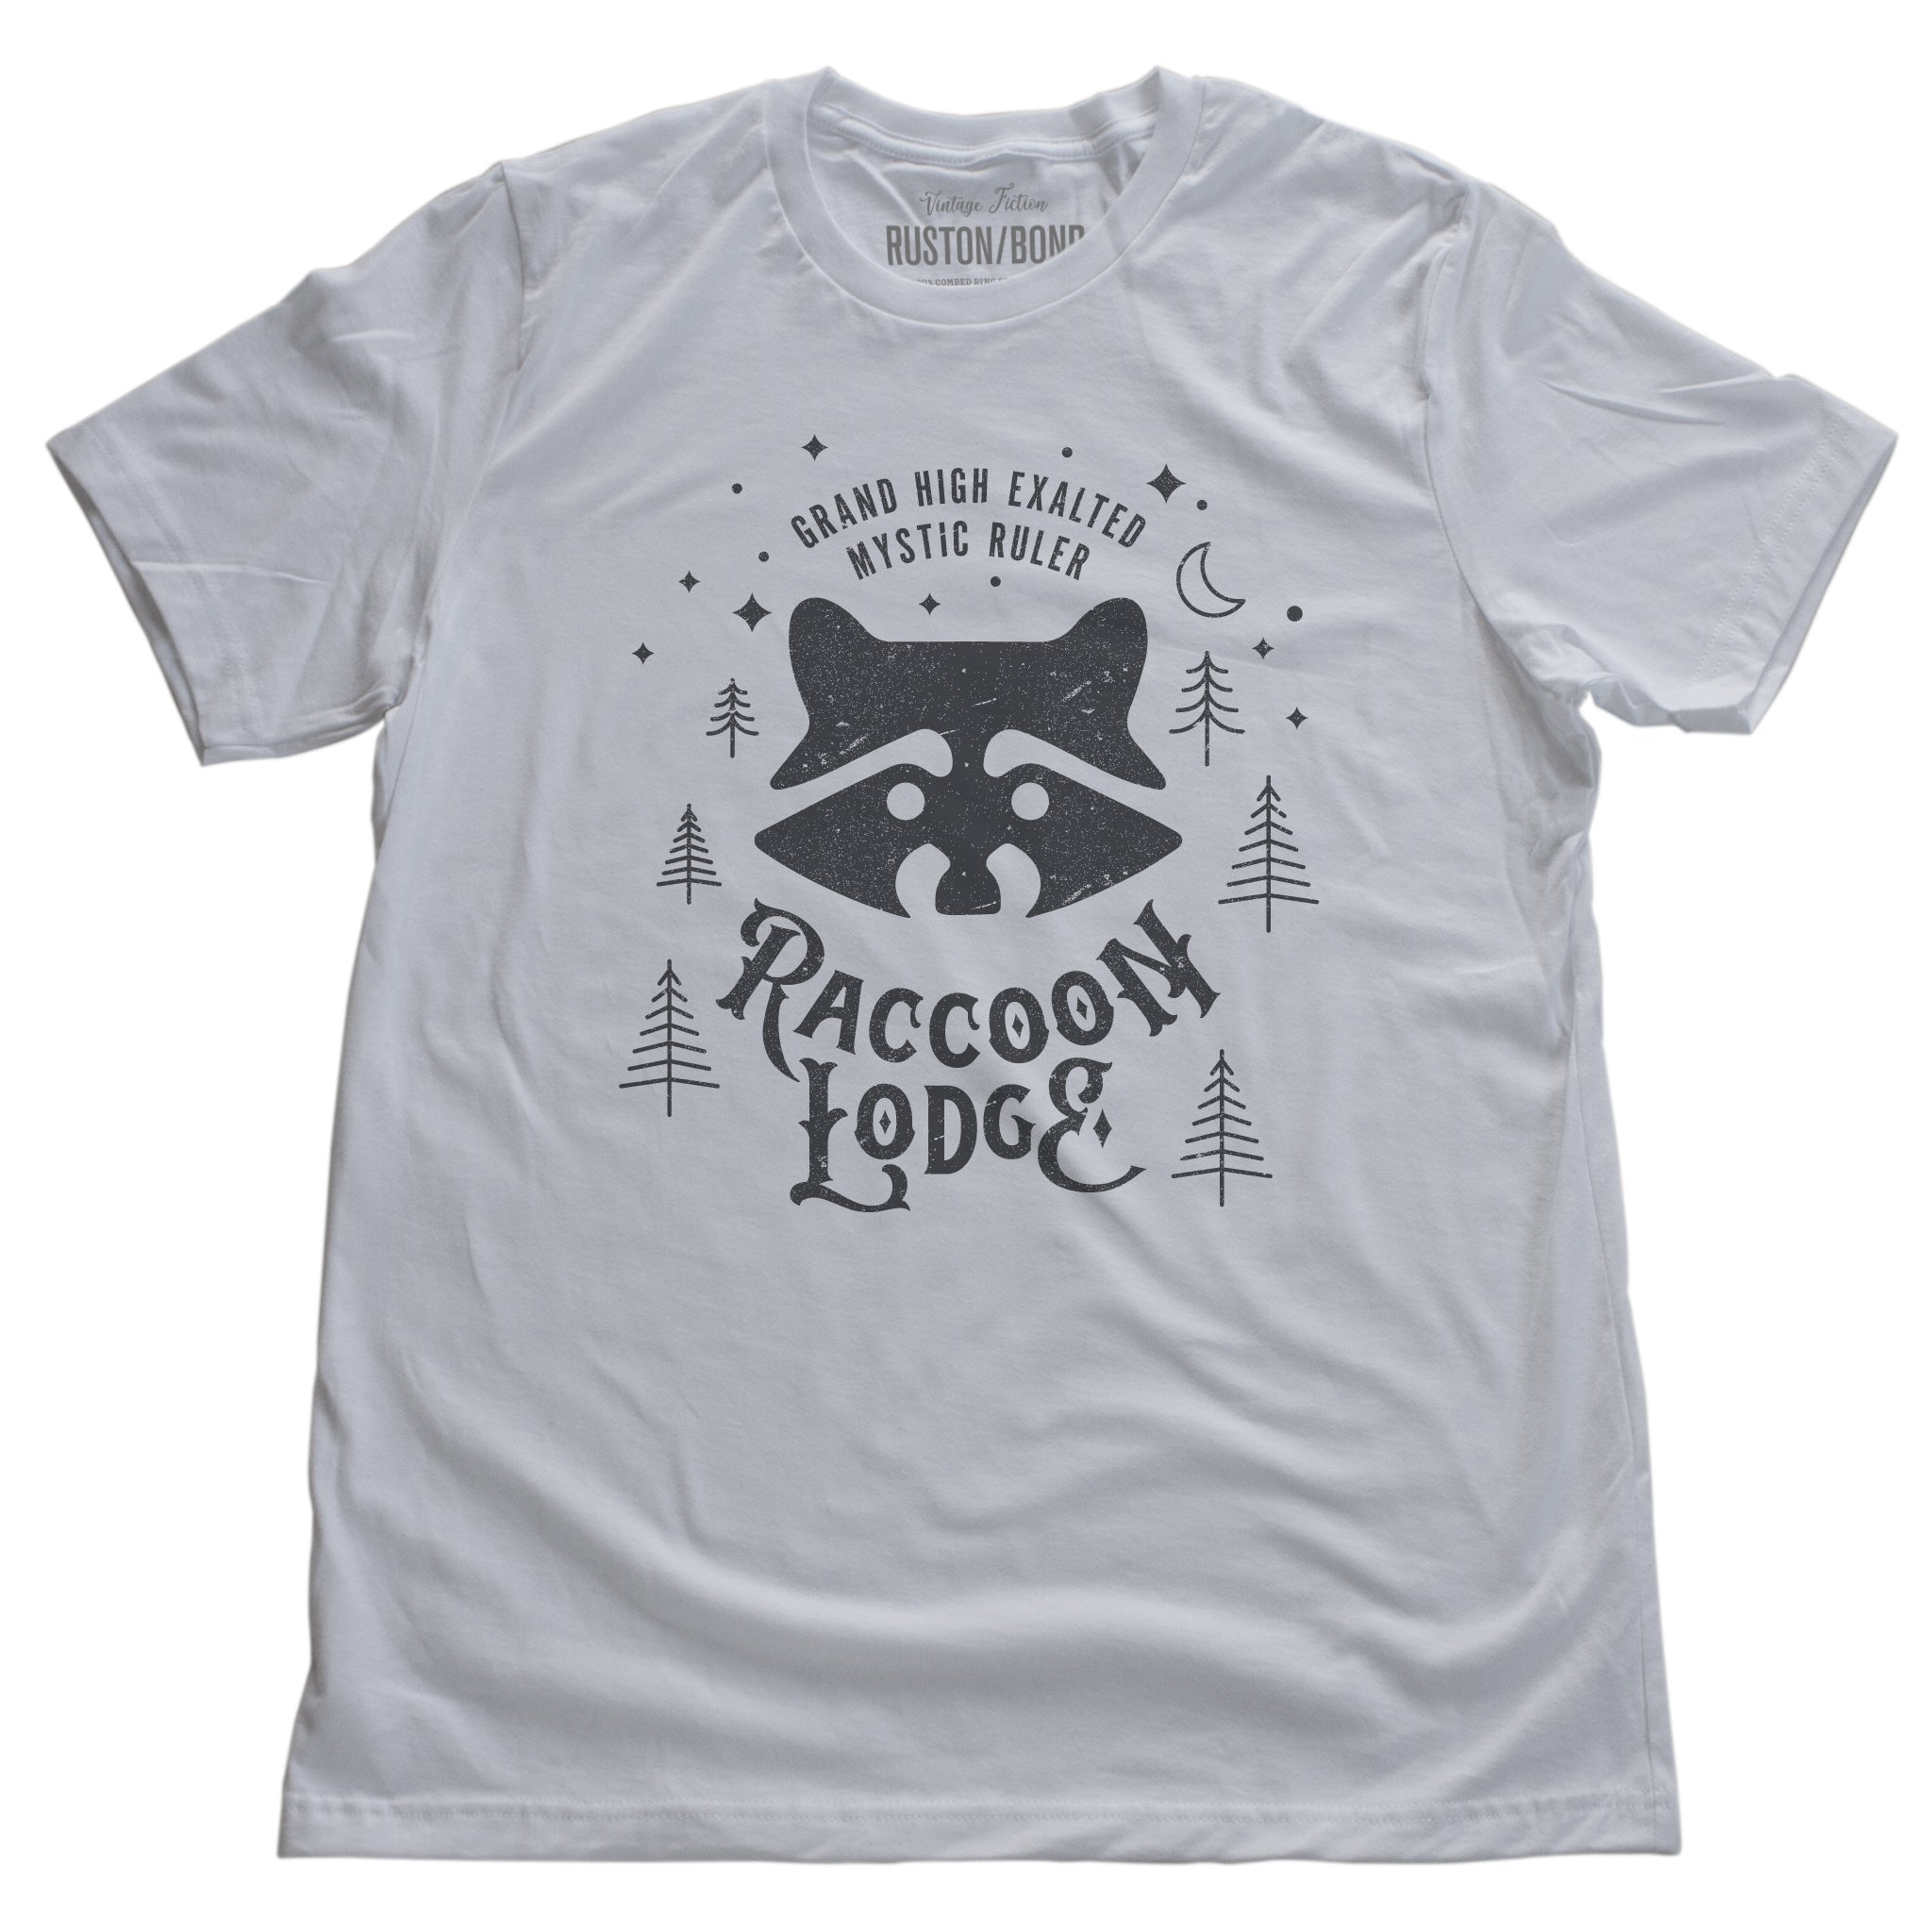 A vintage-look, retro t-shirt in White, inspired by Ralph Kramden and Ed Norton’s club on The Honeymooners tv show. The graphic depicts the Raccoon Lodge from the tv show. By fashion brand Ruston/Bond, for wolfsaint.net